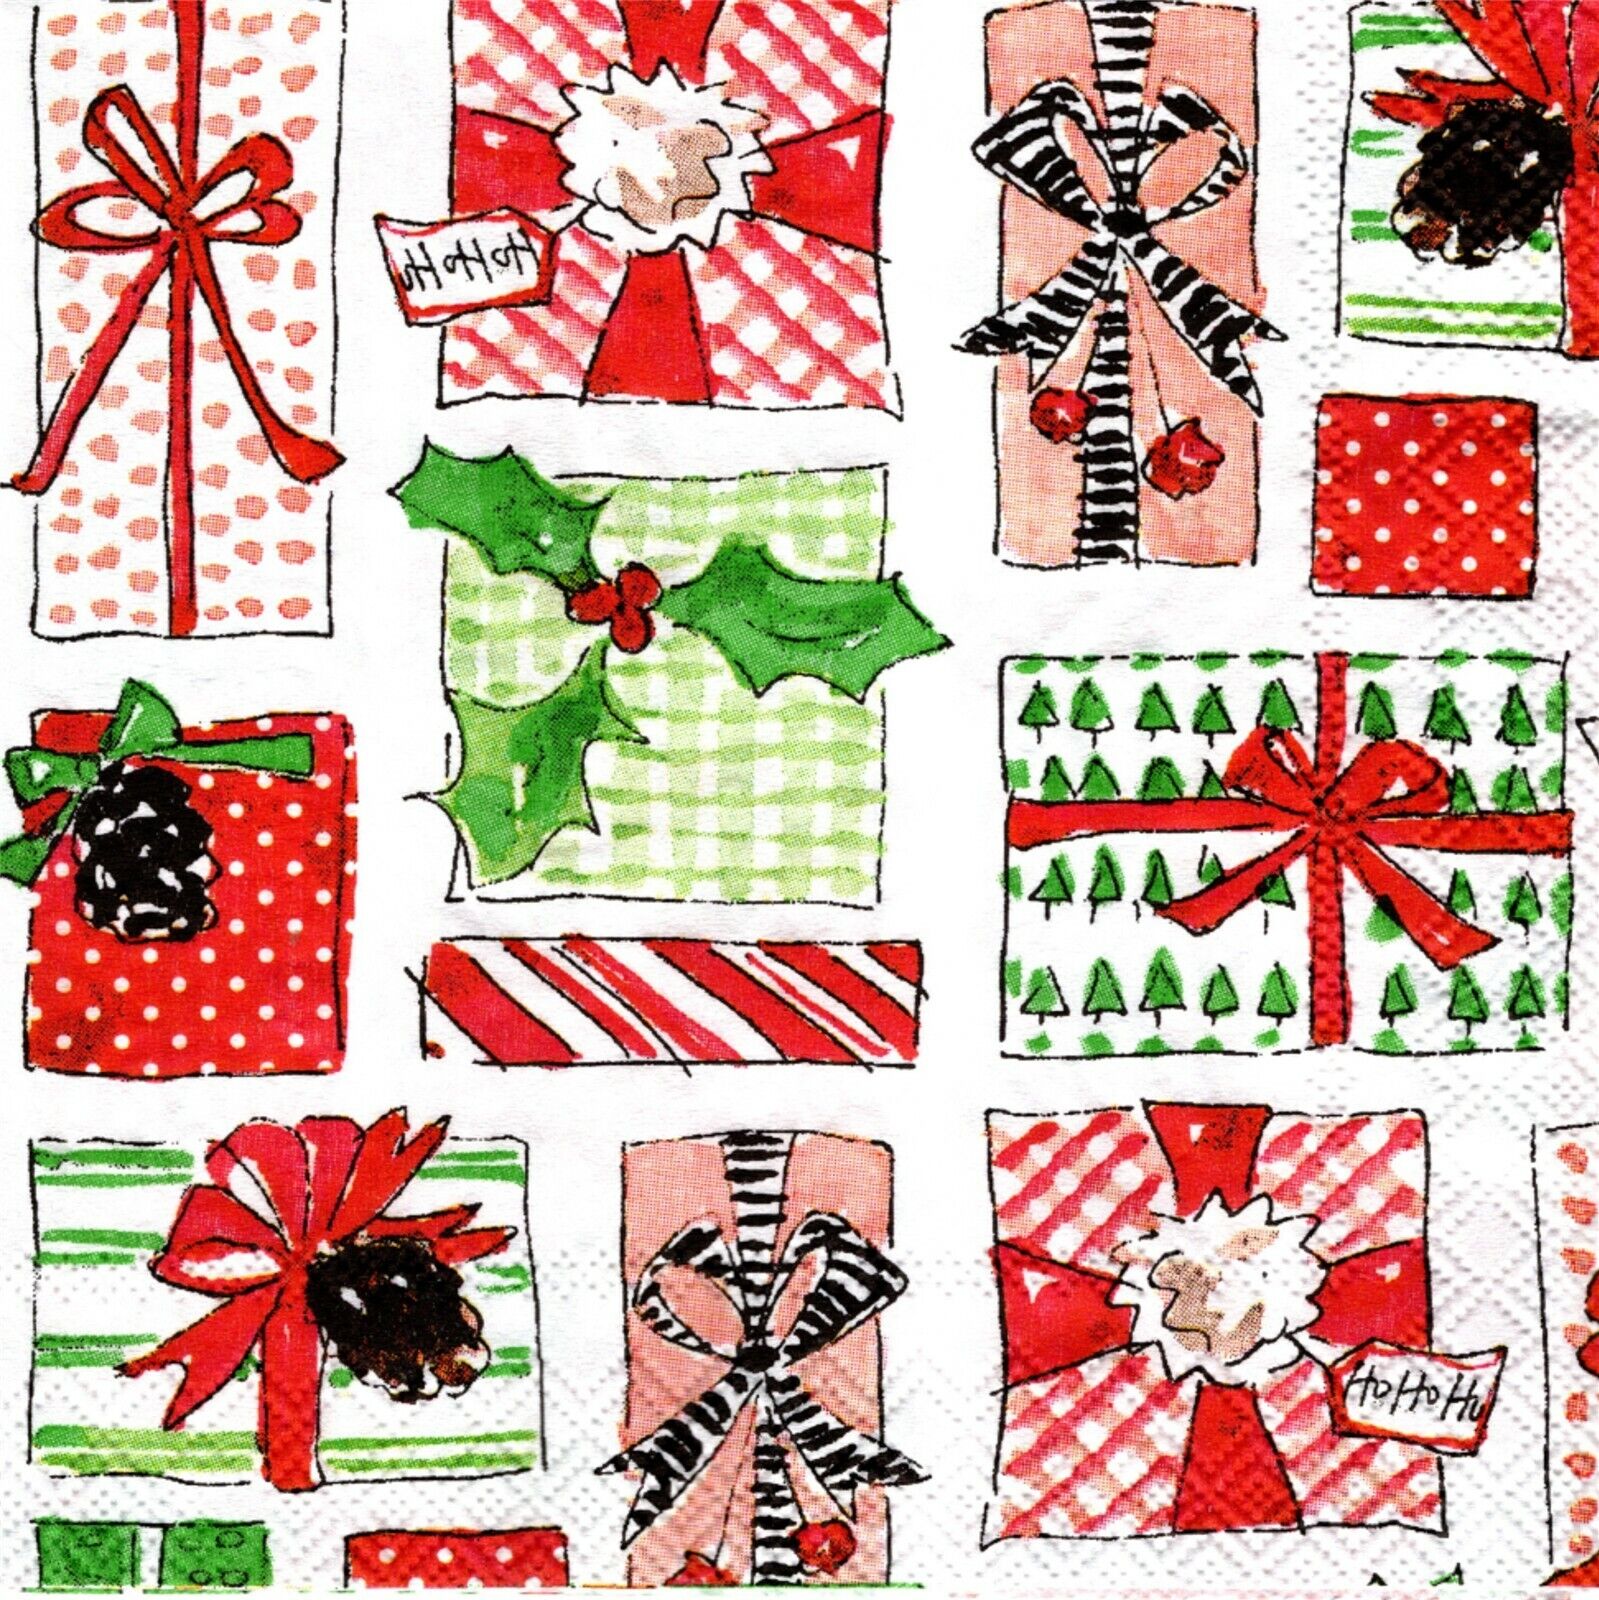 (2) Paper Beverage Napkins for Decoupage/Mixed Media - Christmas Gifts